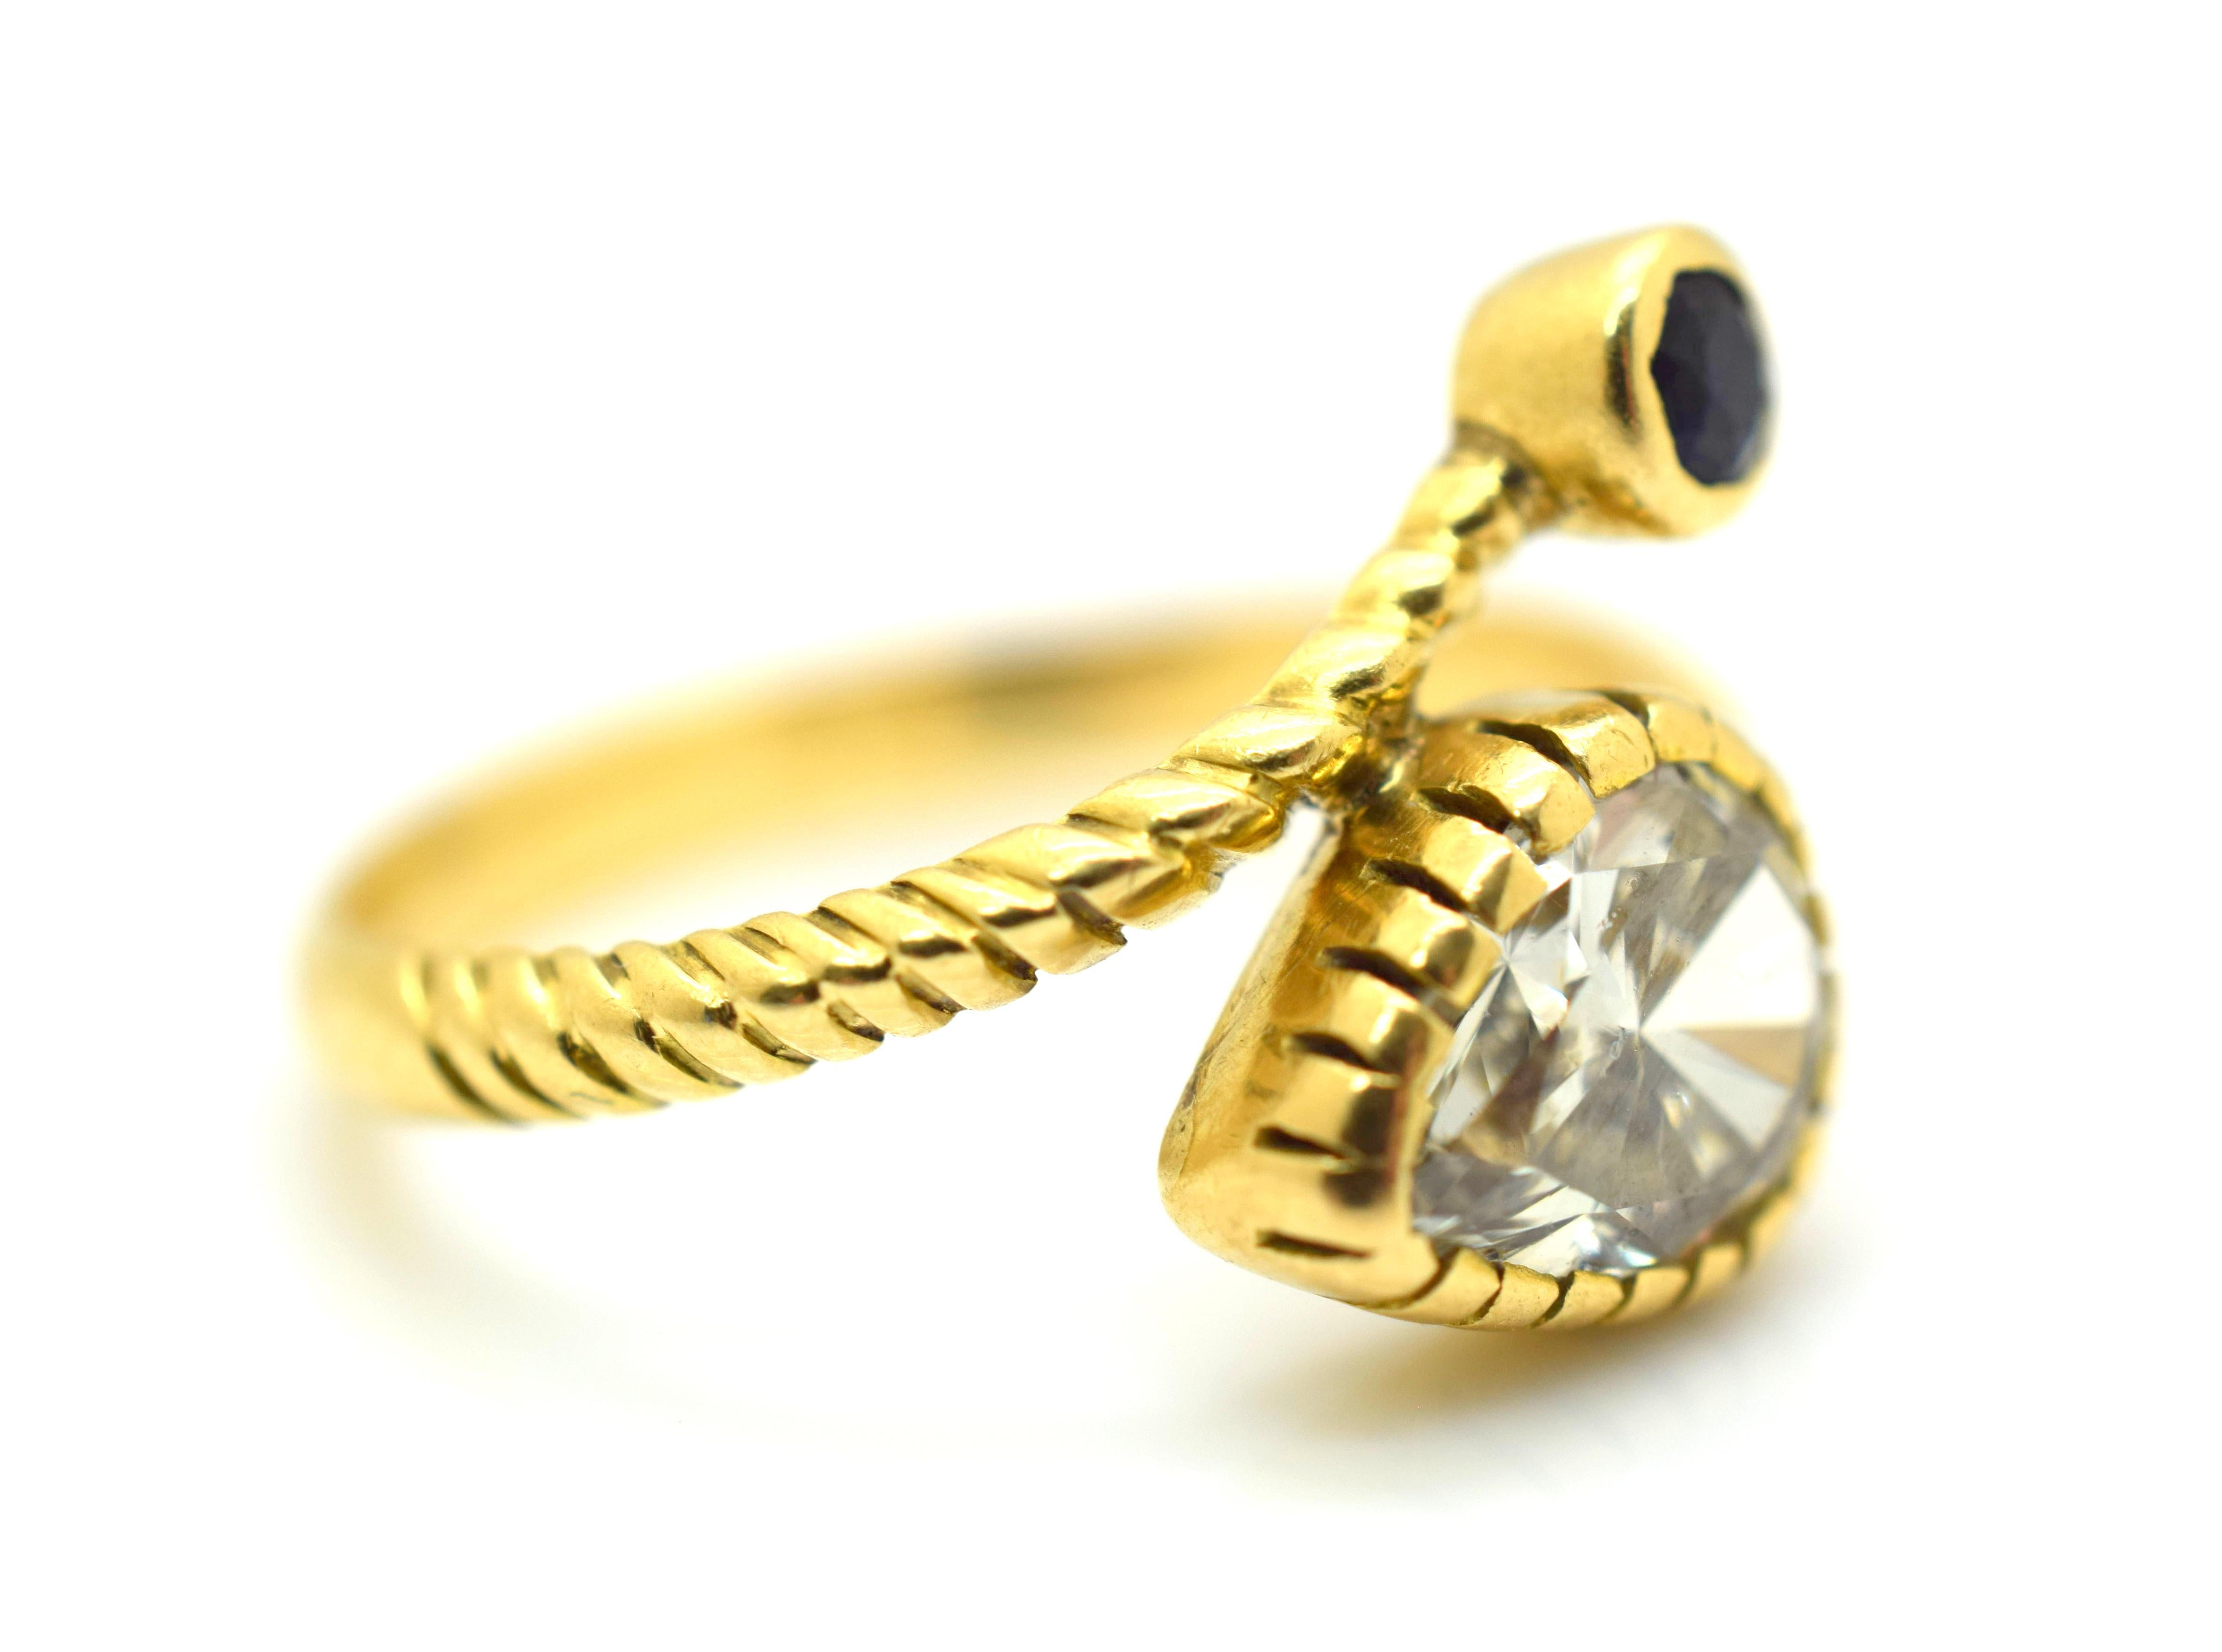 Amazing Diamond Snake Ring set in 18k Yellow Gold. This retro ring is highlighted with one bezel set natural Pear Shape Diamond. The Diamond shows K-L color and Vs clarity. Diamond is approximately 1.40 ct. Shadows in pictures and bezel setting make